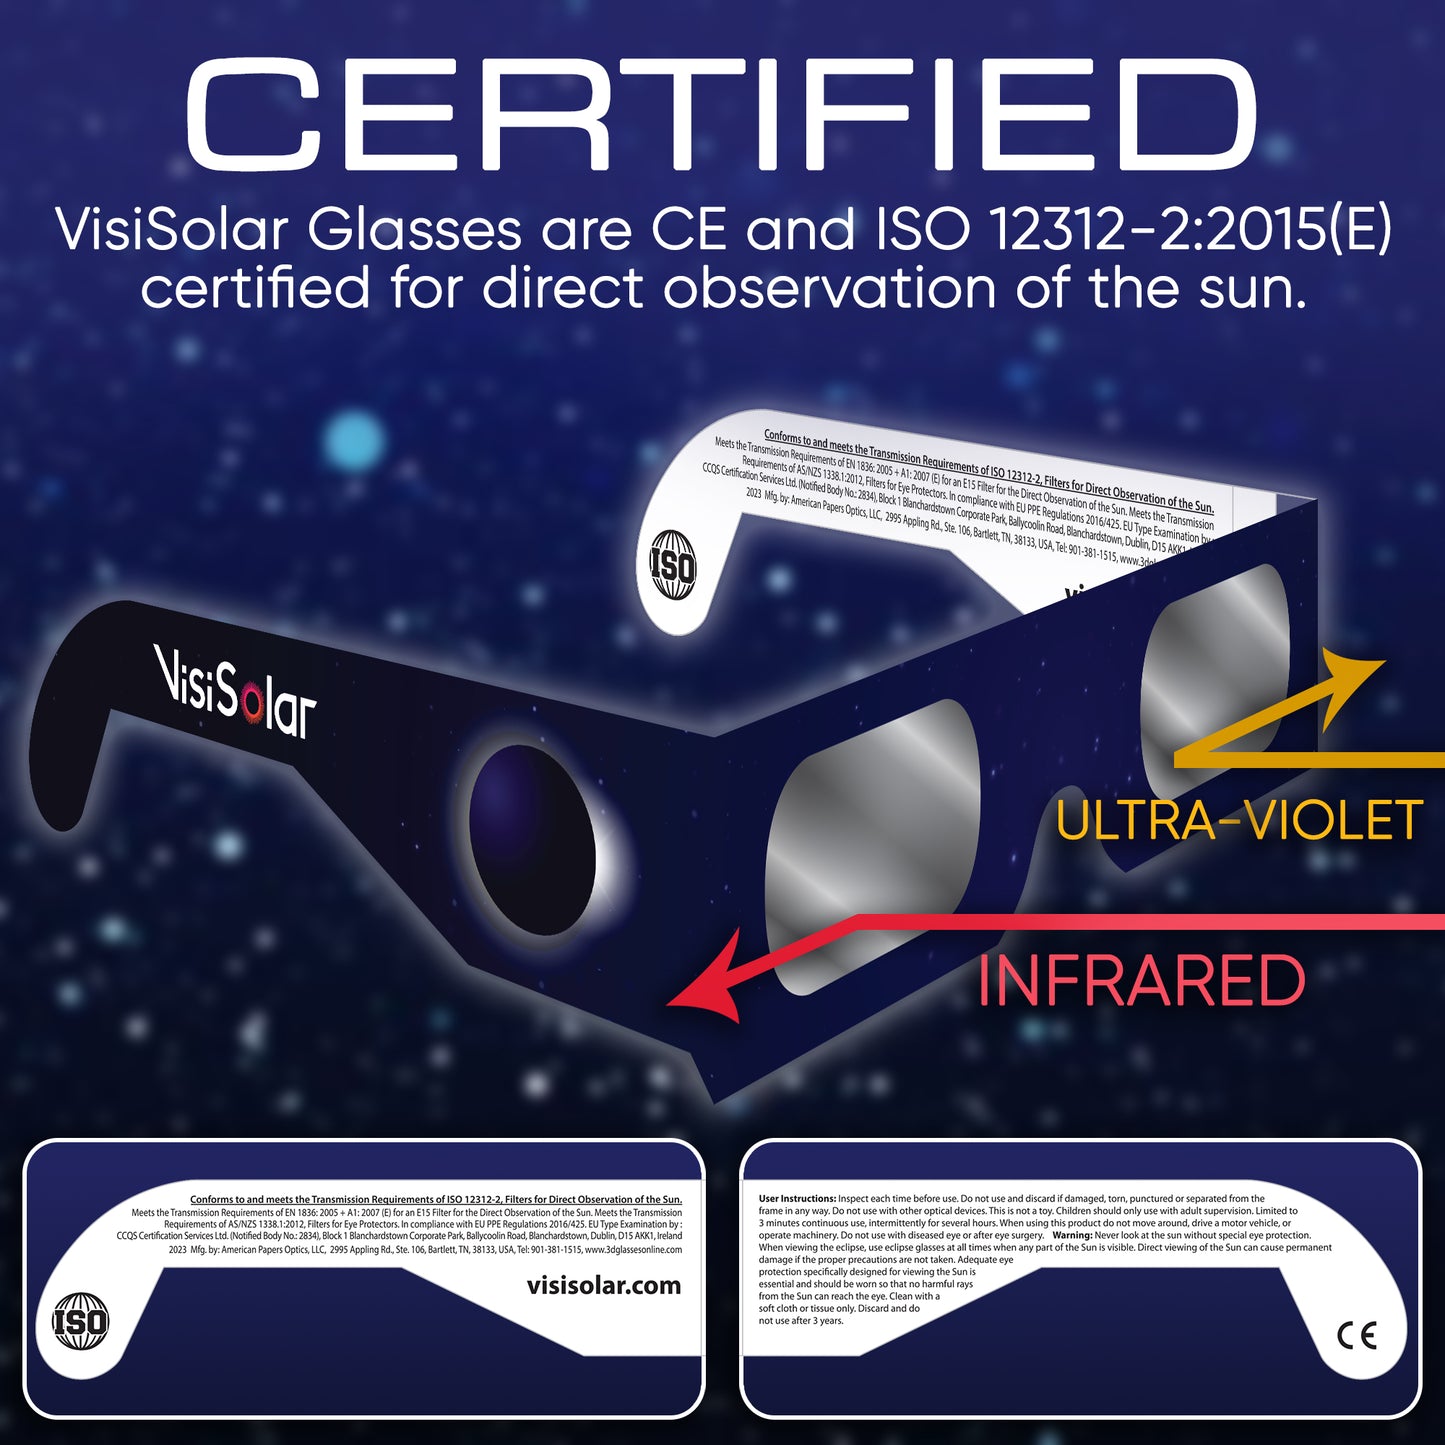 VisiSolar Eclipse Glasses and Photo Filter Combo 5 Pack